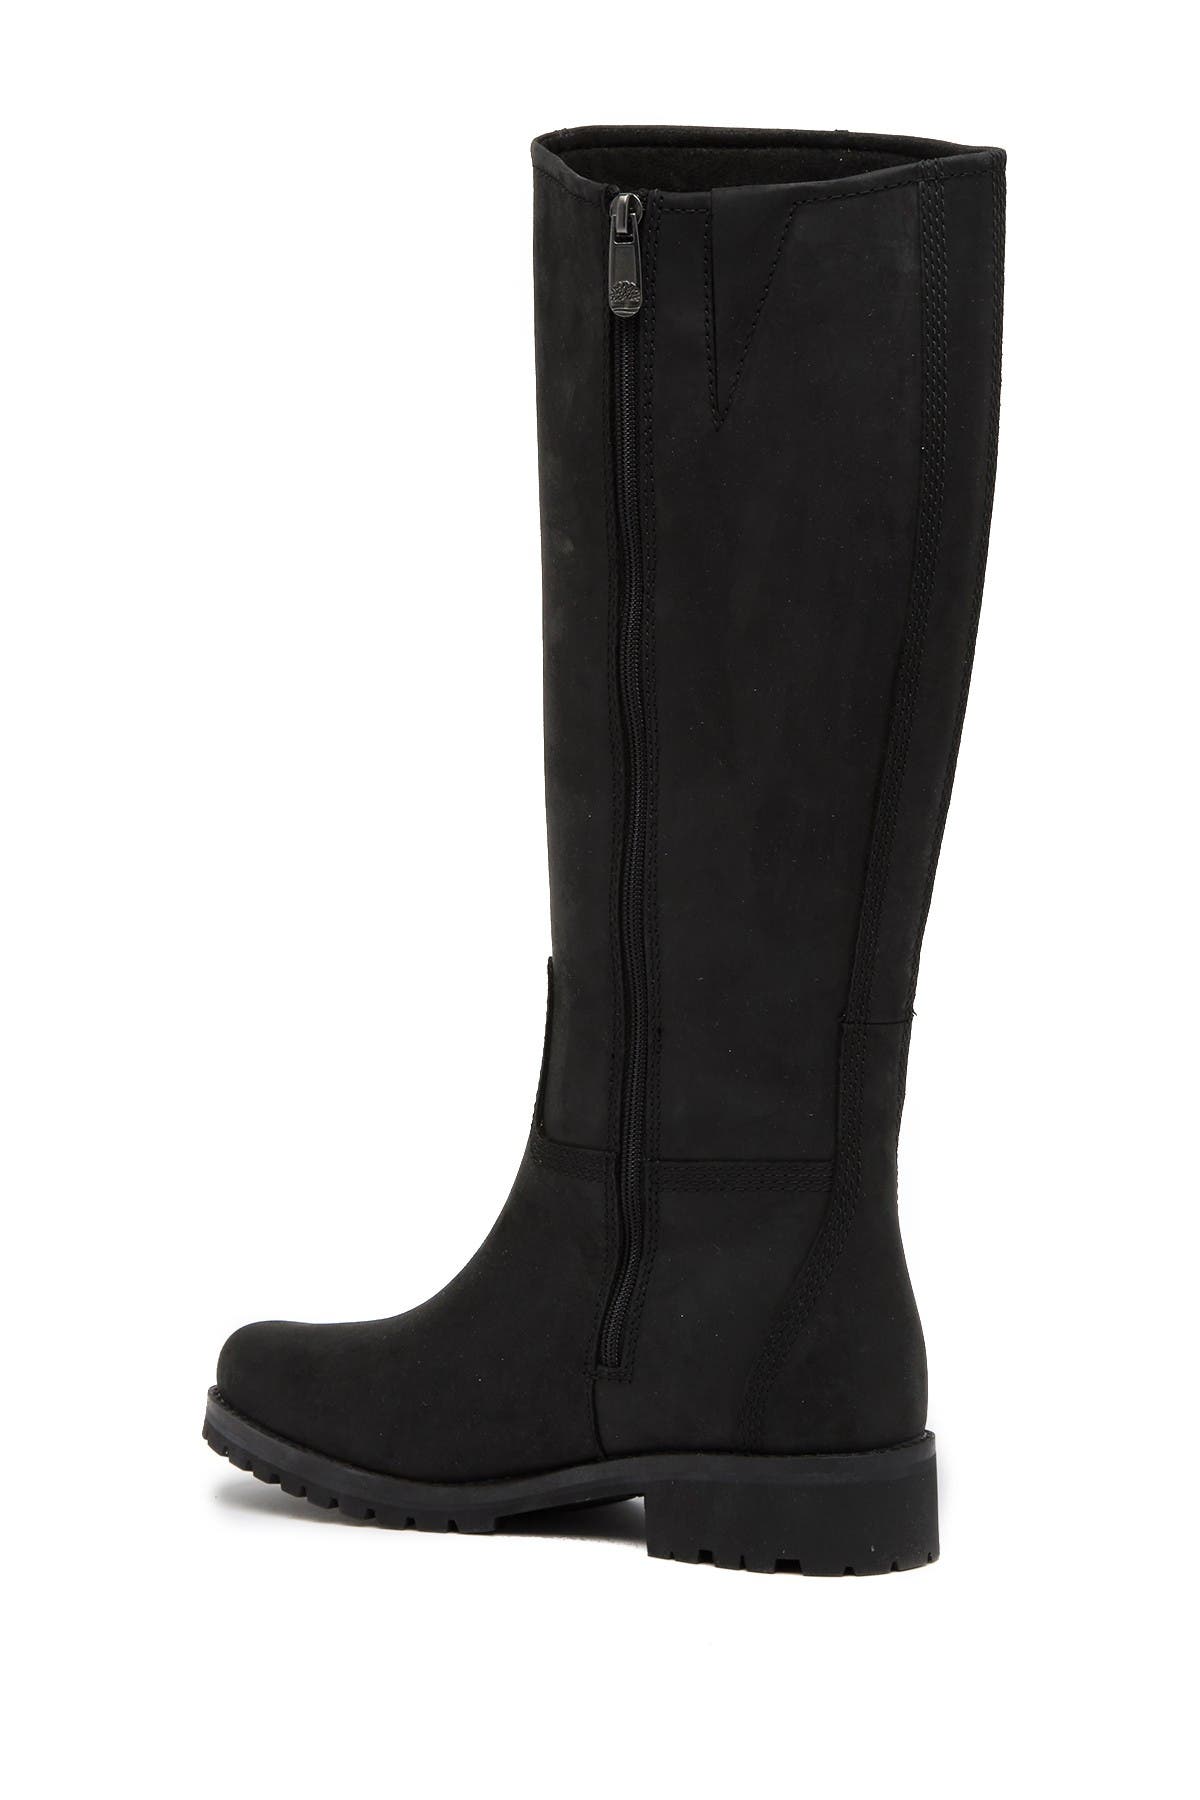 main hill tall boot for women in black